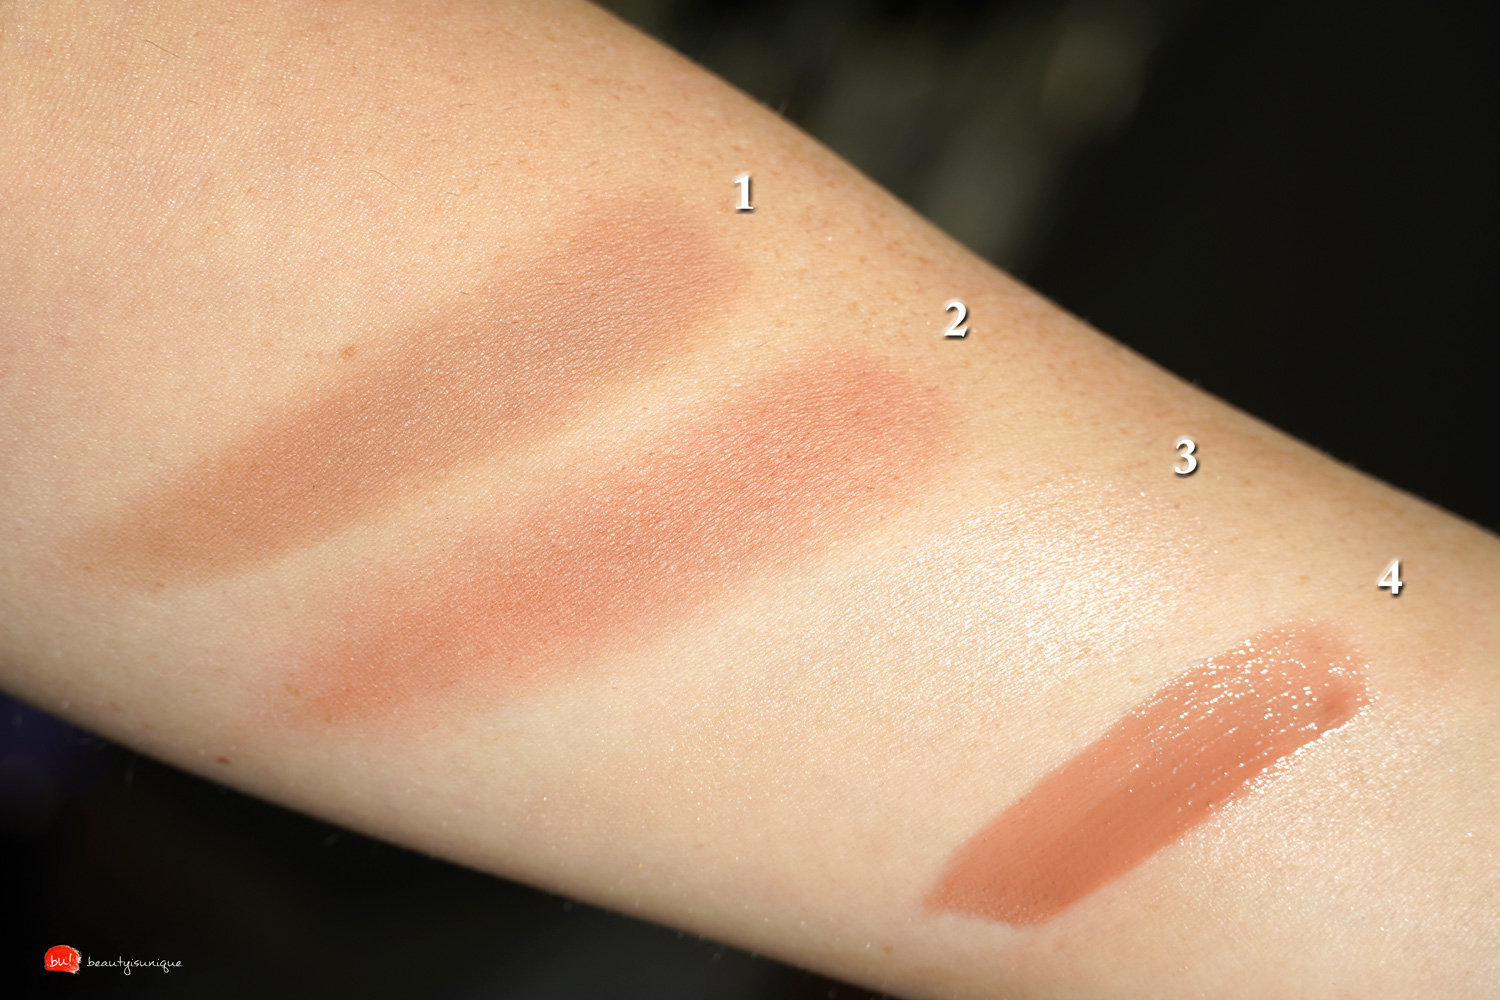 Tom-ford-sous-le-sable-eye-shadow-quad-swatches